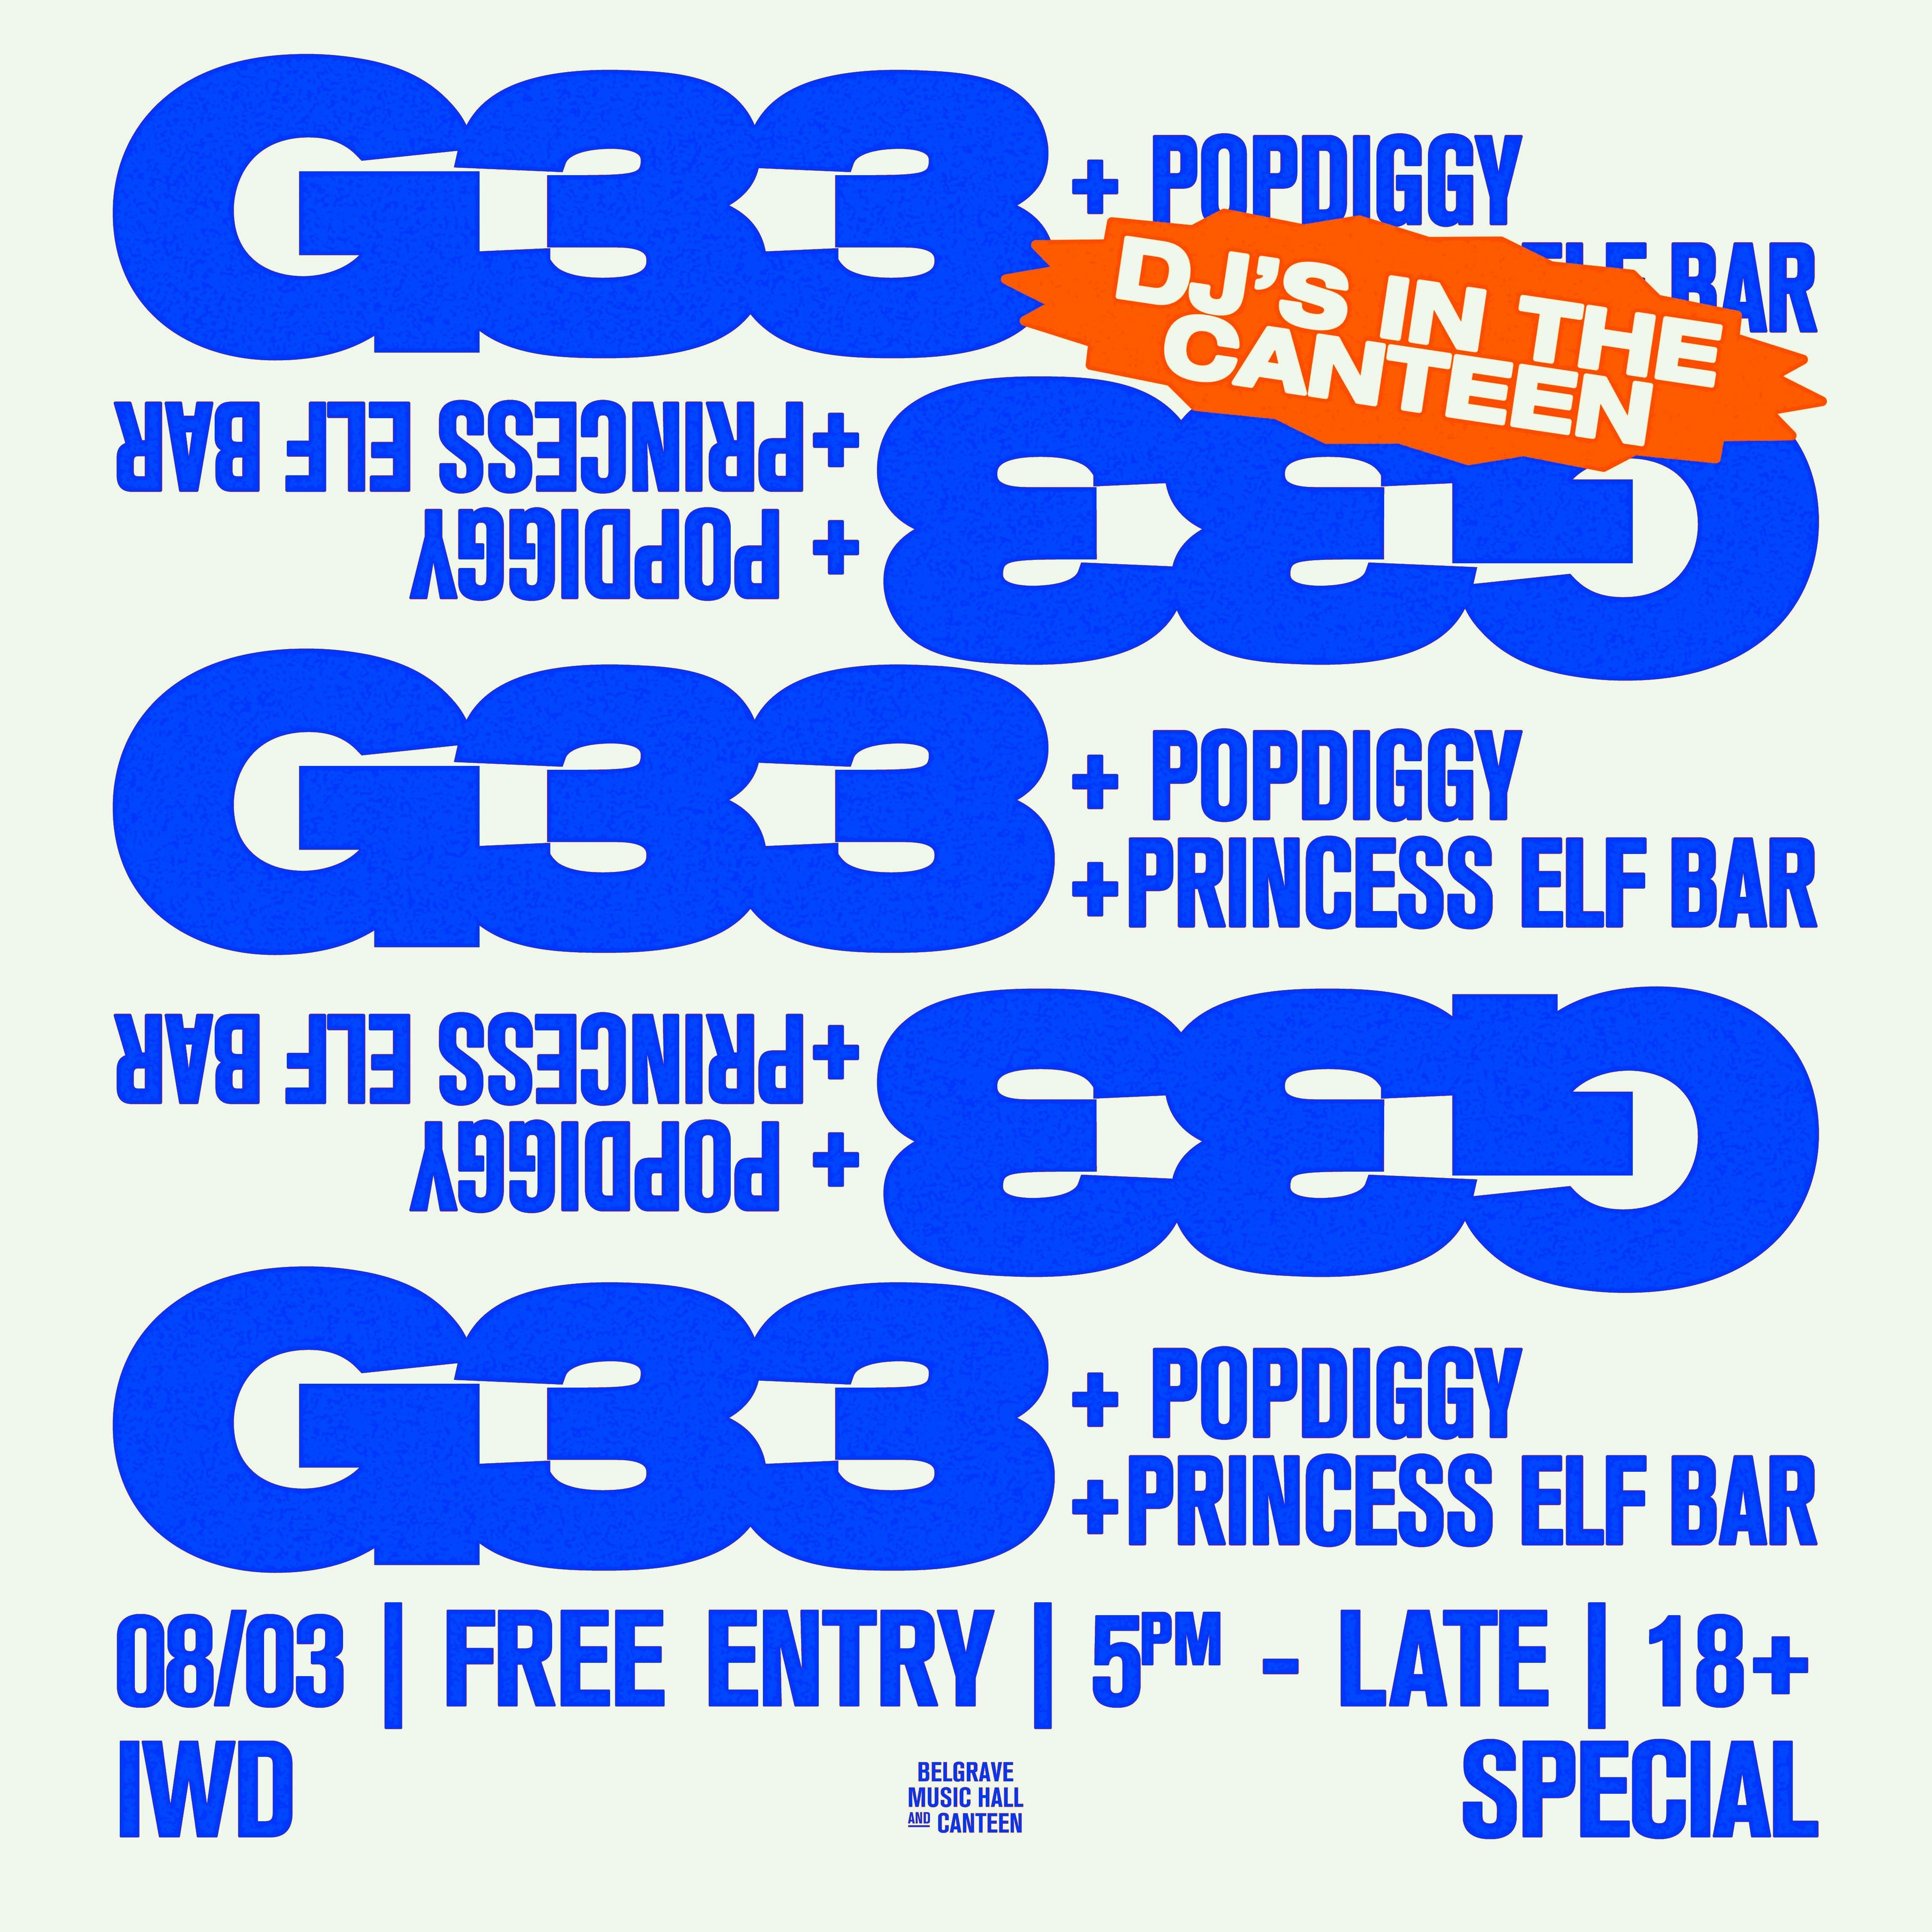 International Women's Day Special with: G33 + special guests - フライヤー表